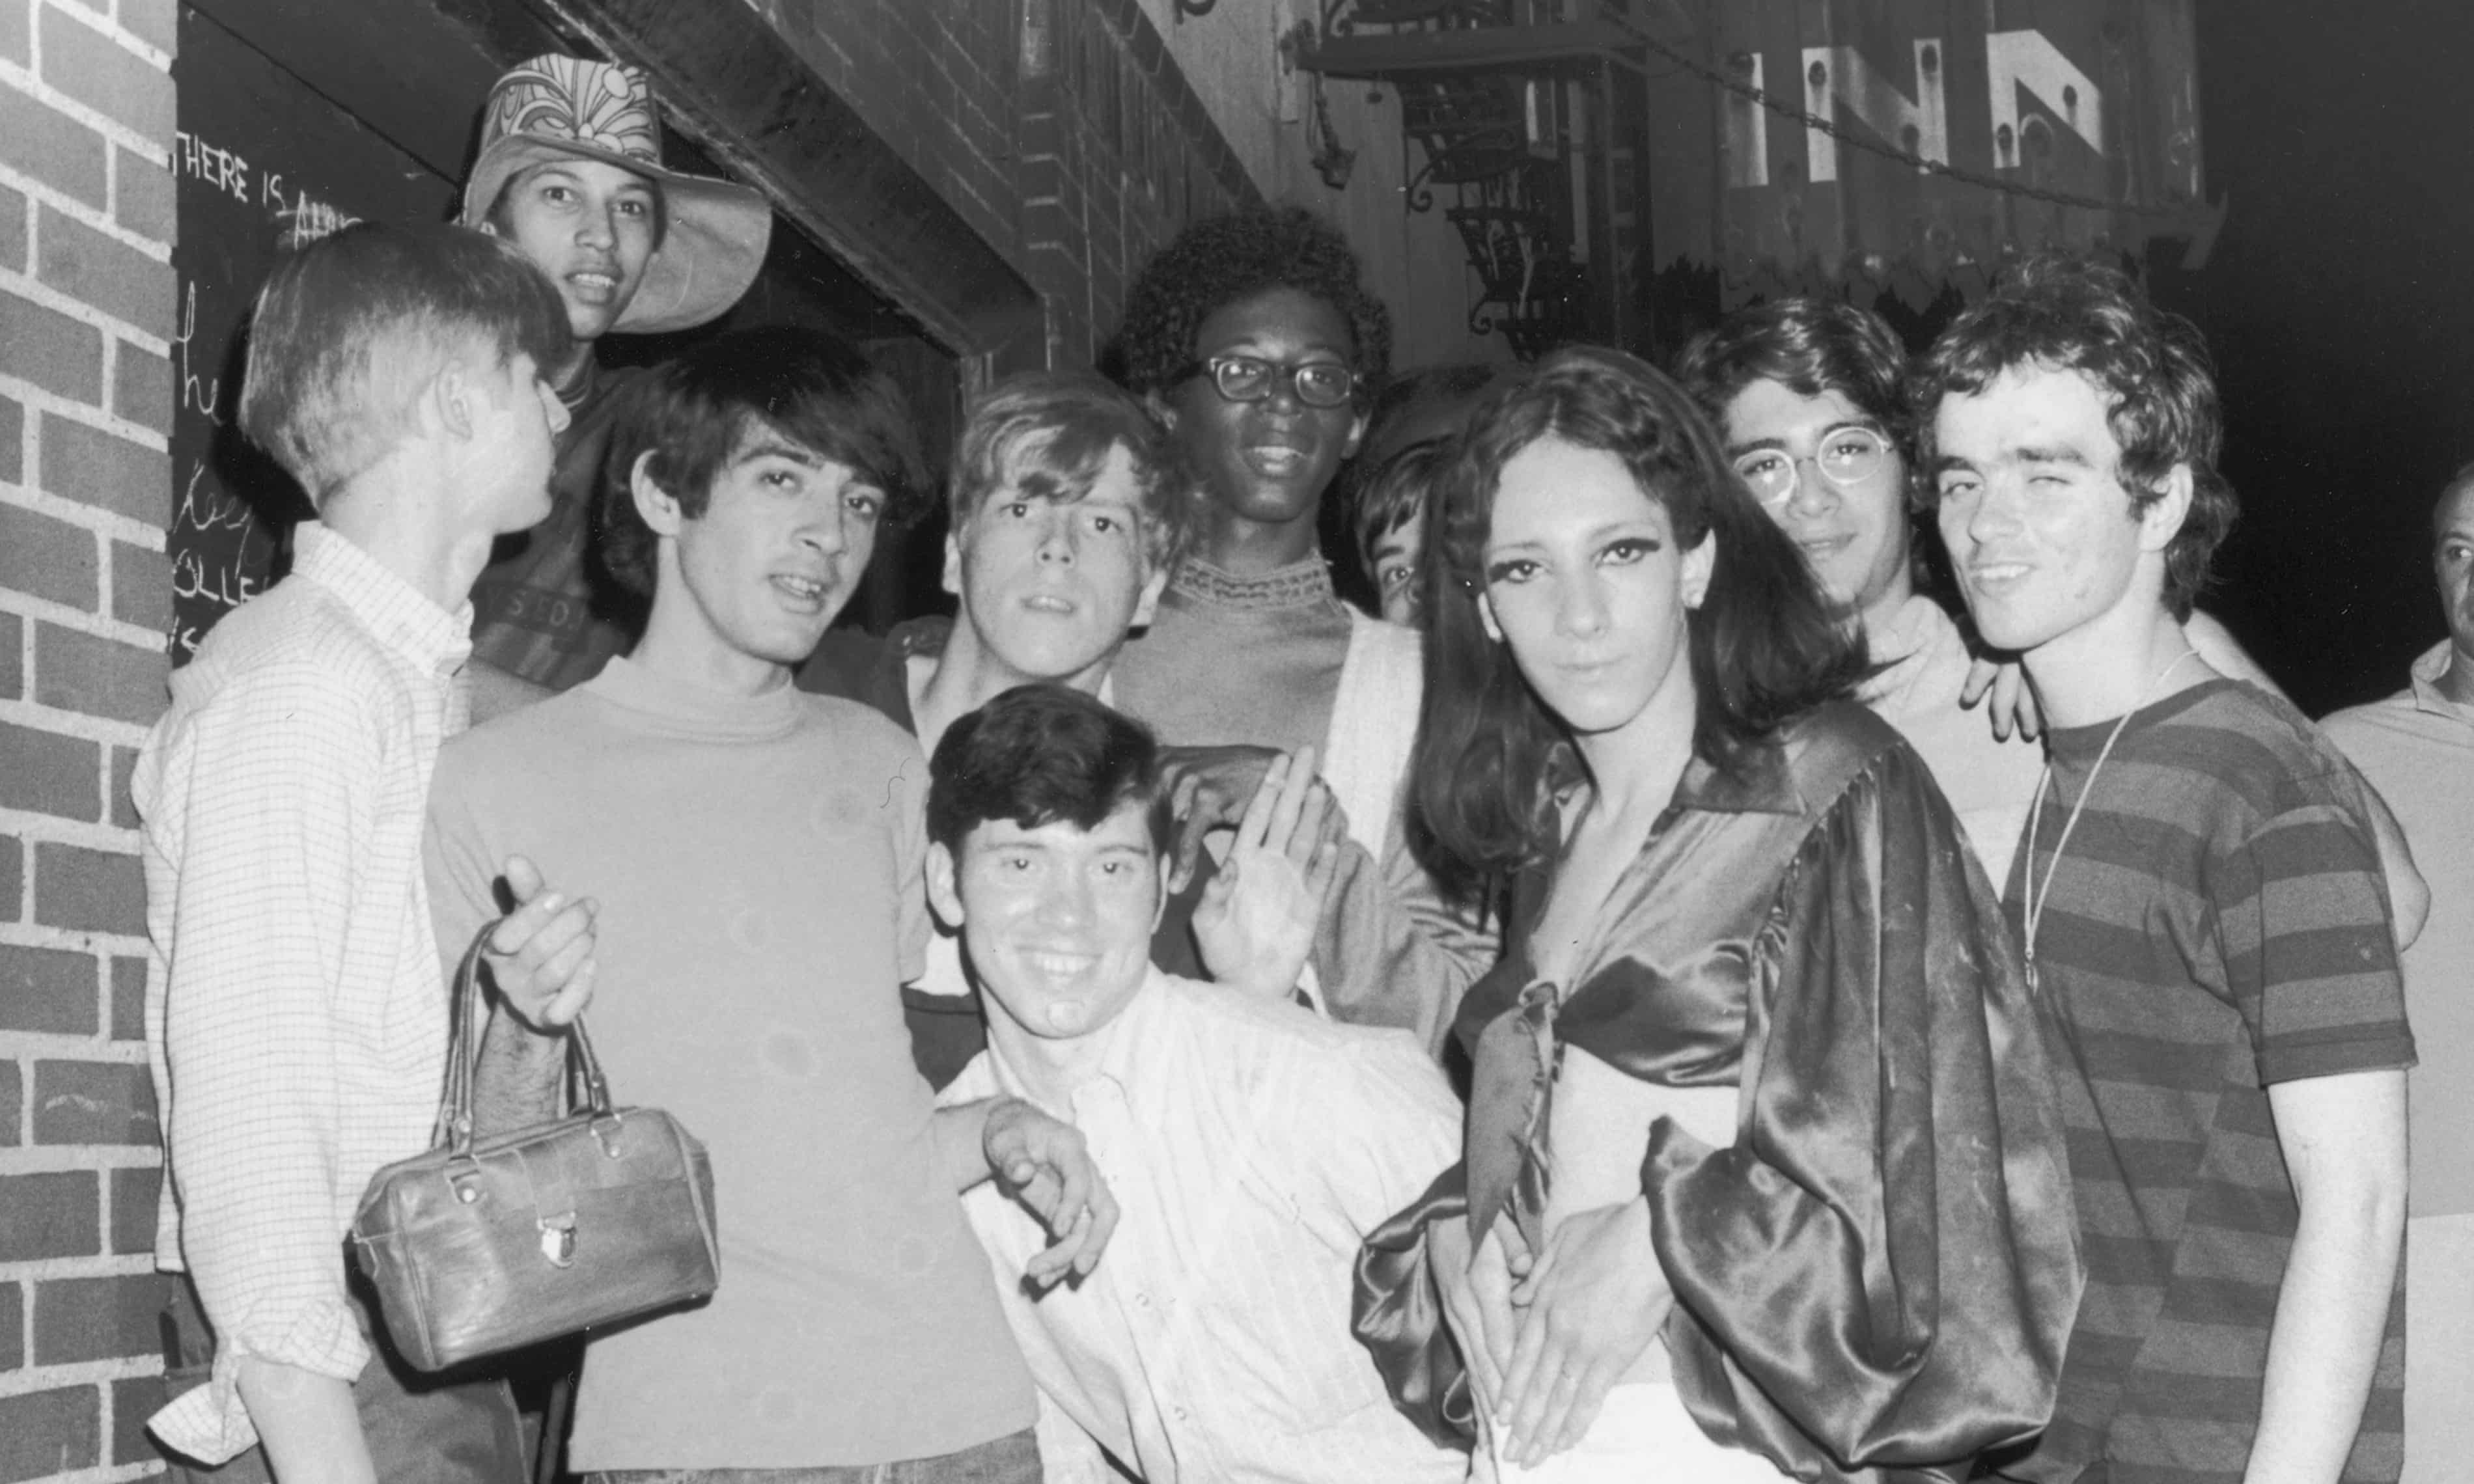 A group of young people – including Tommy Lanigan -Schmidt on the far right – celebrate outside the boarded-up Stonewall Inn after the riots.","credit":"Photograph: Fred W McDarrah